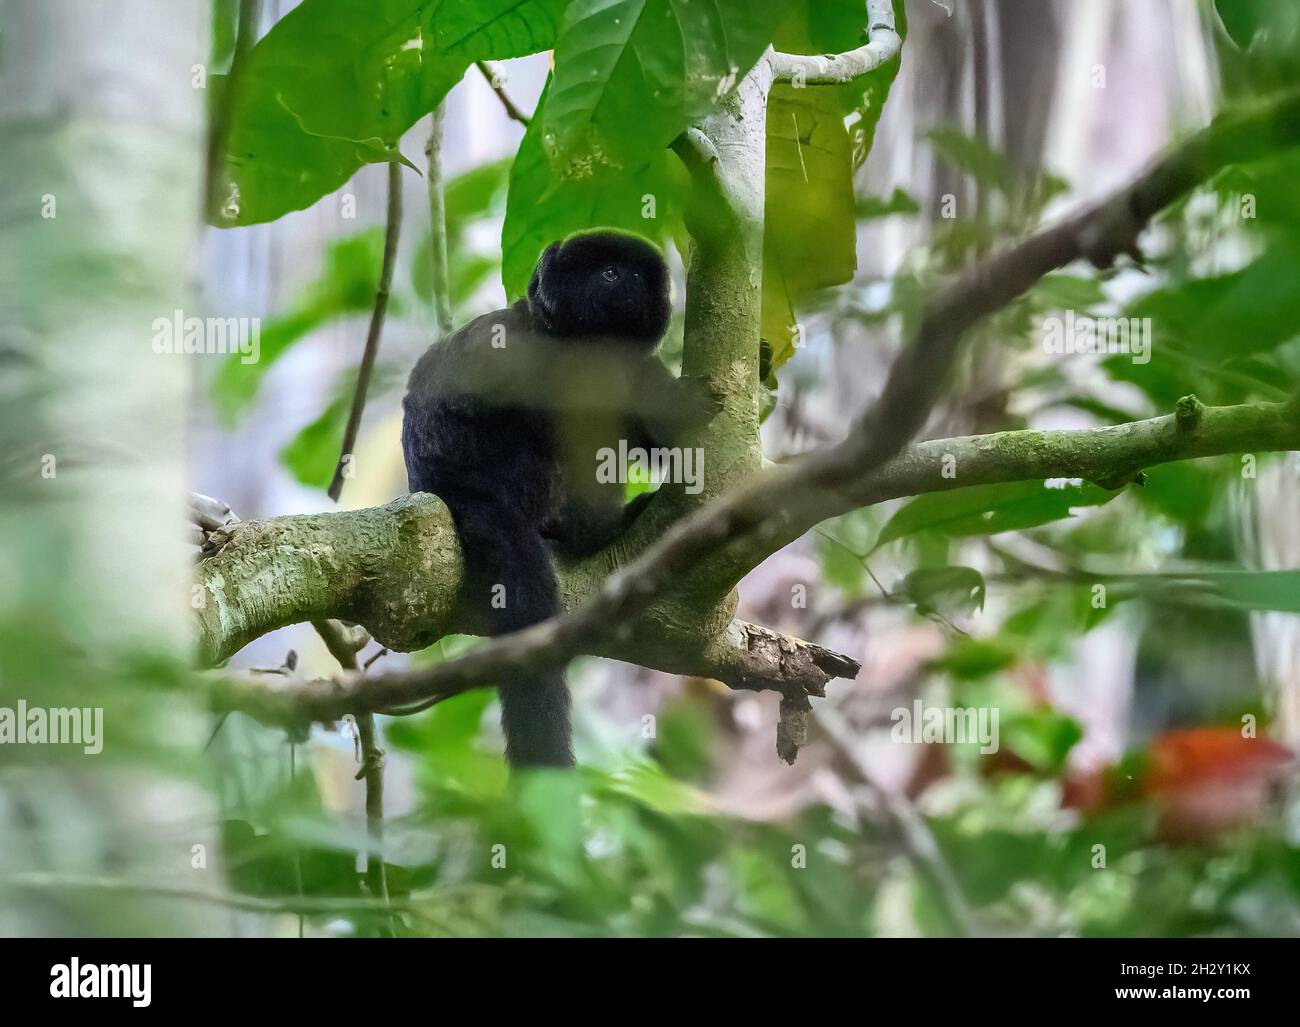 An extremely rare Goeldi's Marmoset (Callimico goeldii) sitting on a tree. Photographed in the wild. Manu National Park, Madre de Dios, Peru. Stock Photo